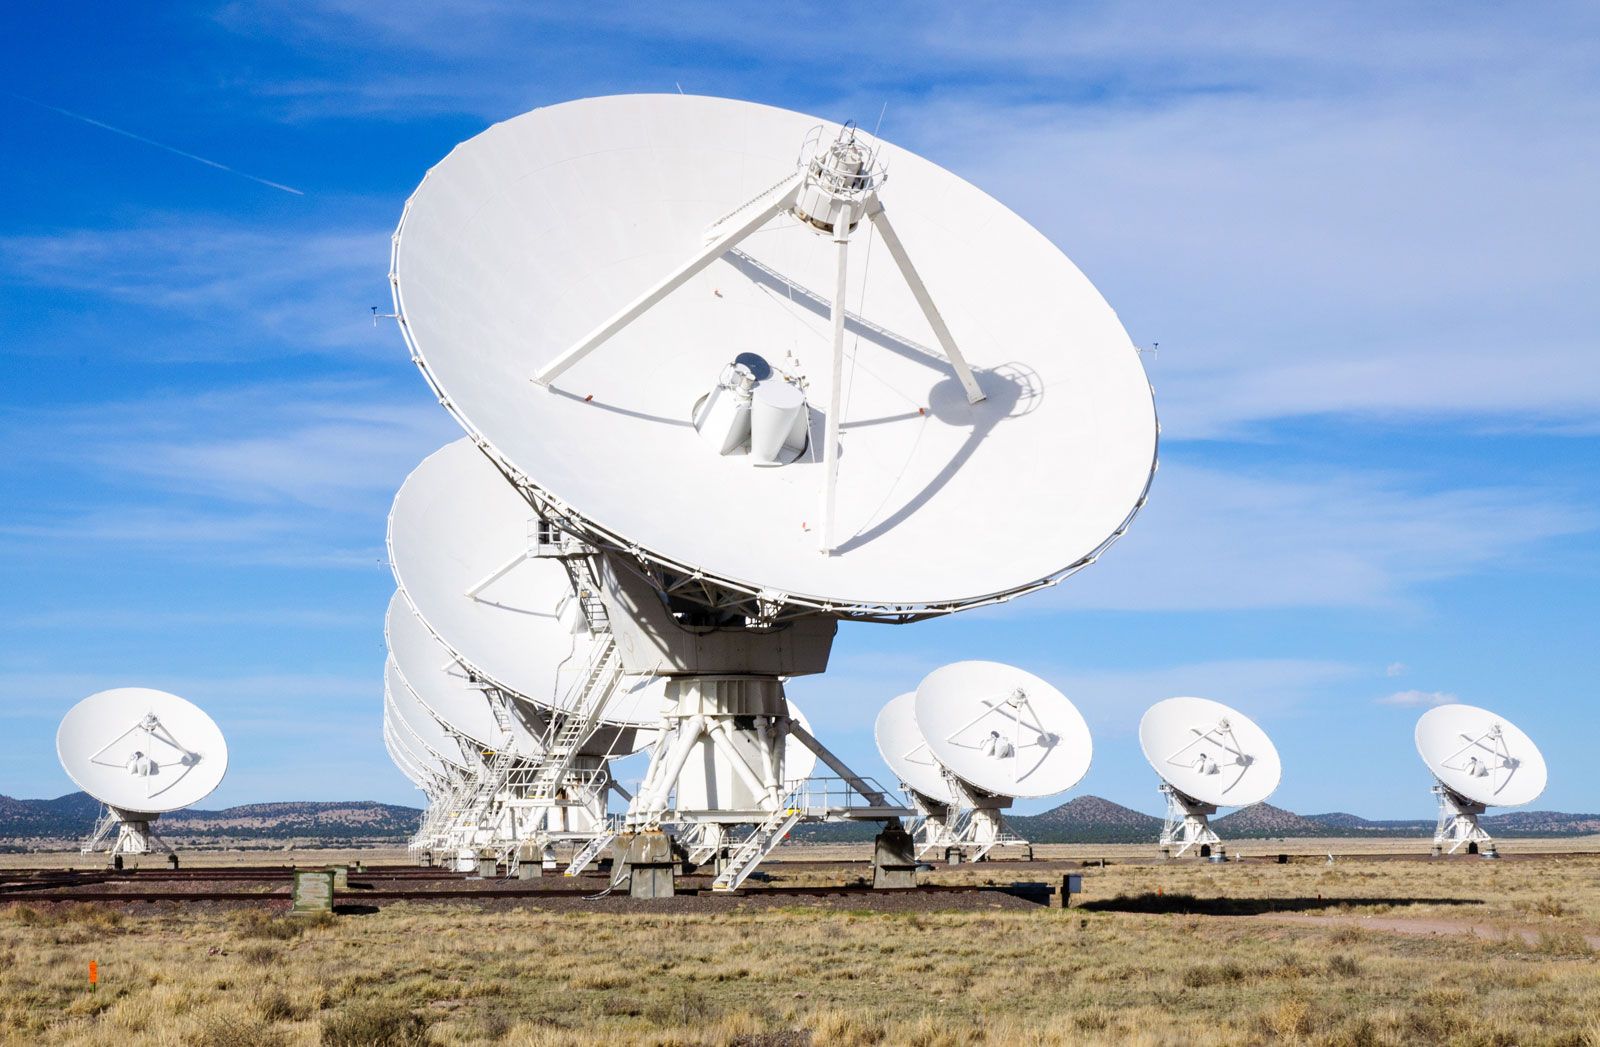 what is a radio telescope and how do radio telescopes help astronomers detect objects in the universe